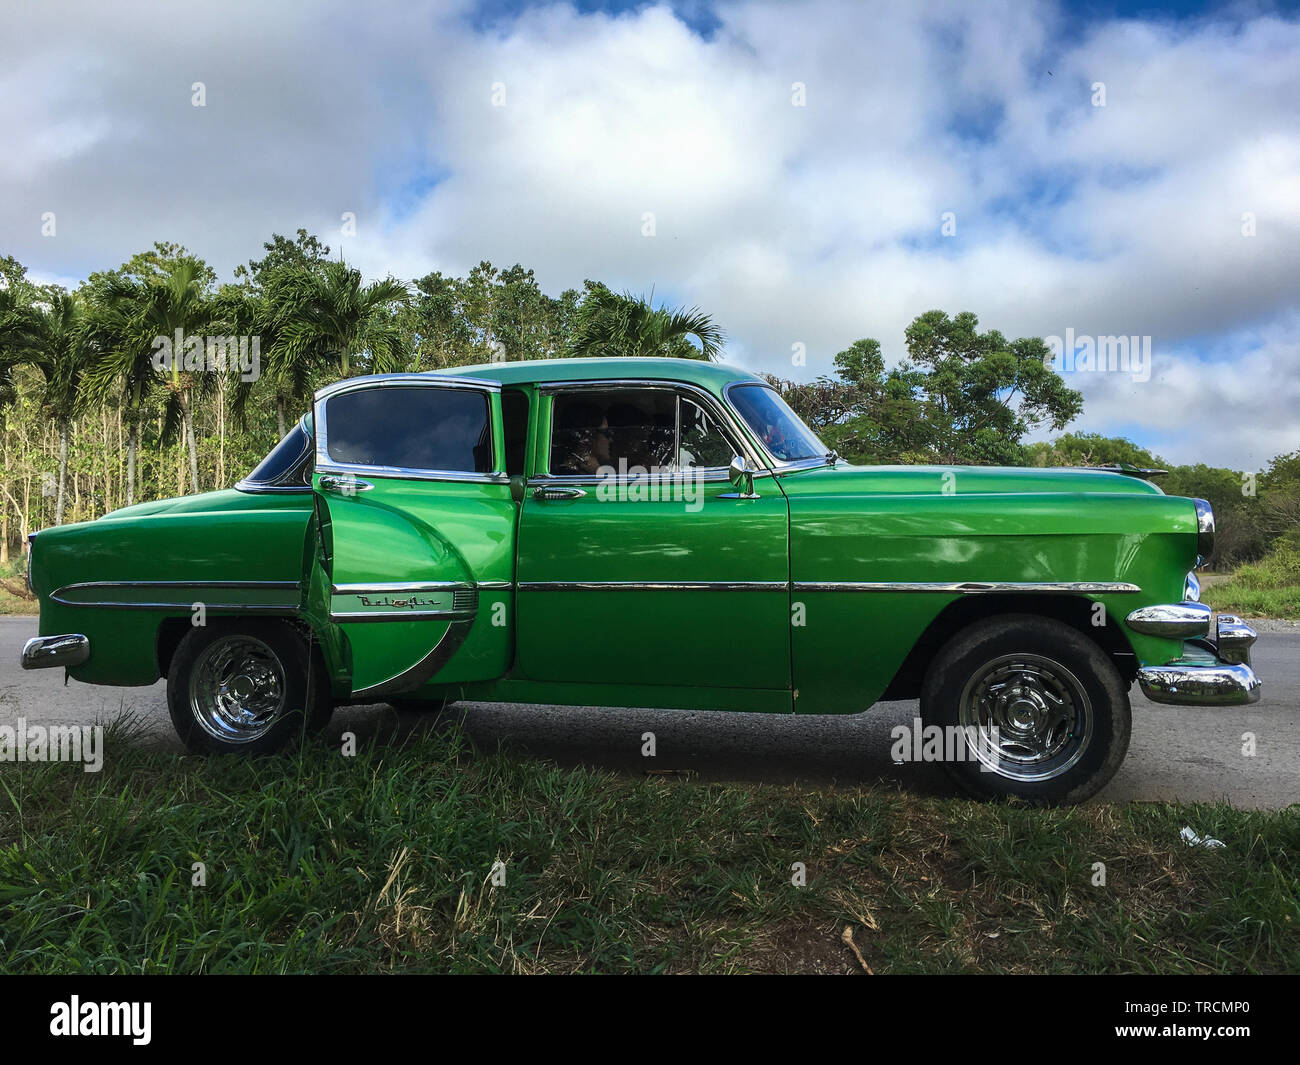 Classic green vintage American car stands parked on a road in front of some palm trees in the Vinales valley, Pinar Del Rio, Cuba Stock Photo